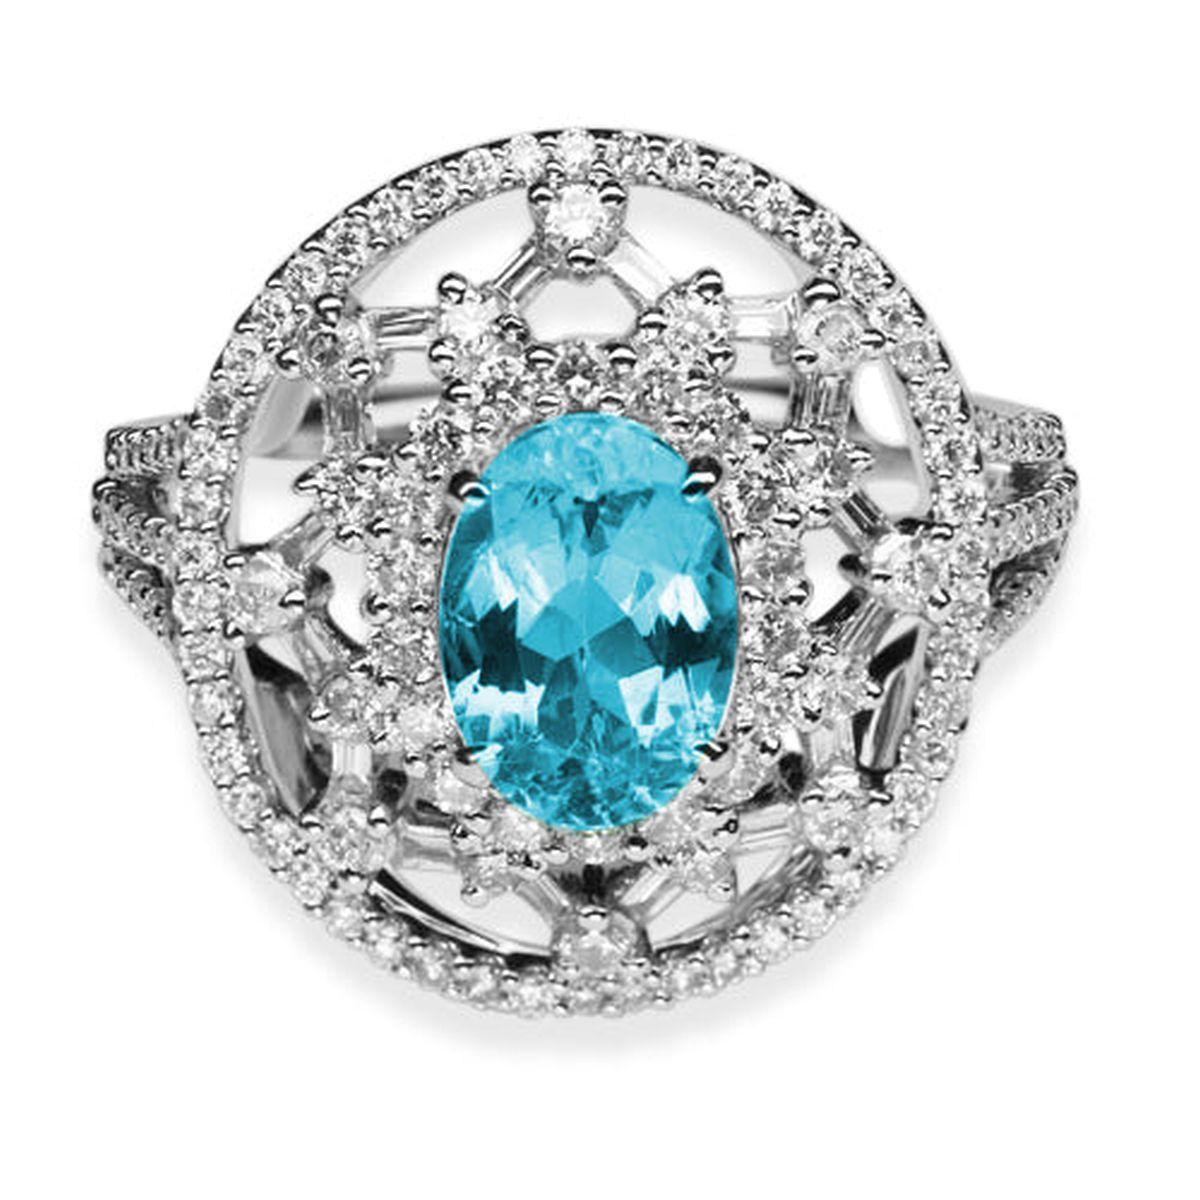 Simply Beautiful! Finely detailed Paraiba Tourmaline and Diamond Gold Cocktail Ring. Centering a Hand set securely nestled 1.45 Carat Oval Paraiba Tourmaline, surrounded by Diamonds, E/F, VS, weighing approx. 0.92tcw, including shank. Artfully Hand